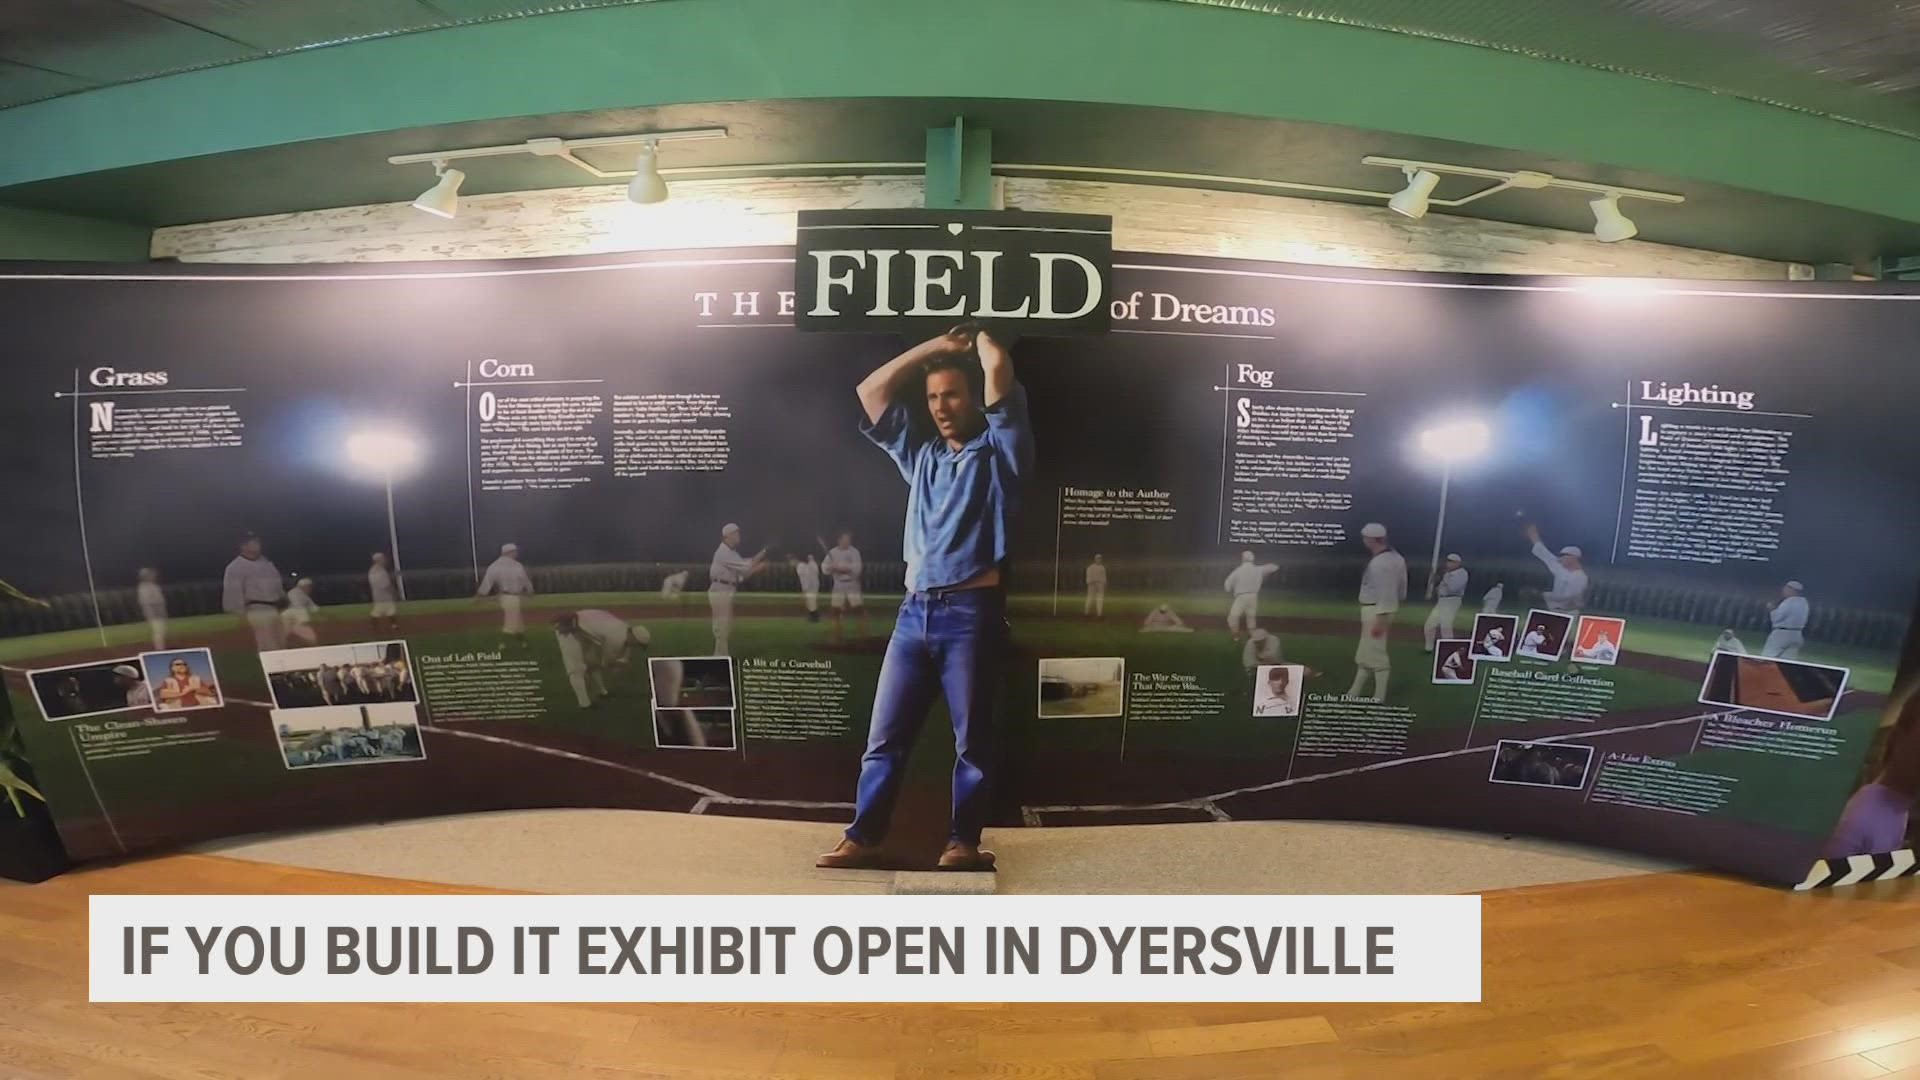 Fans can get their fill of Field of Dreams history with the 'If You Build It' exhibit in downtown Dyersville while the actual field is closed.